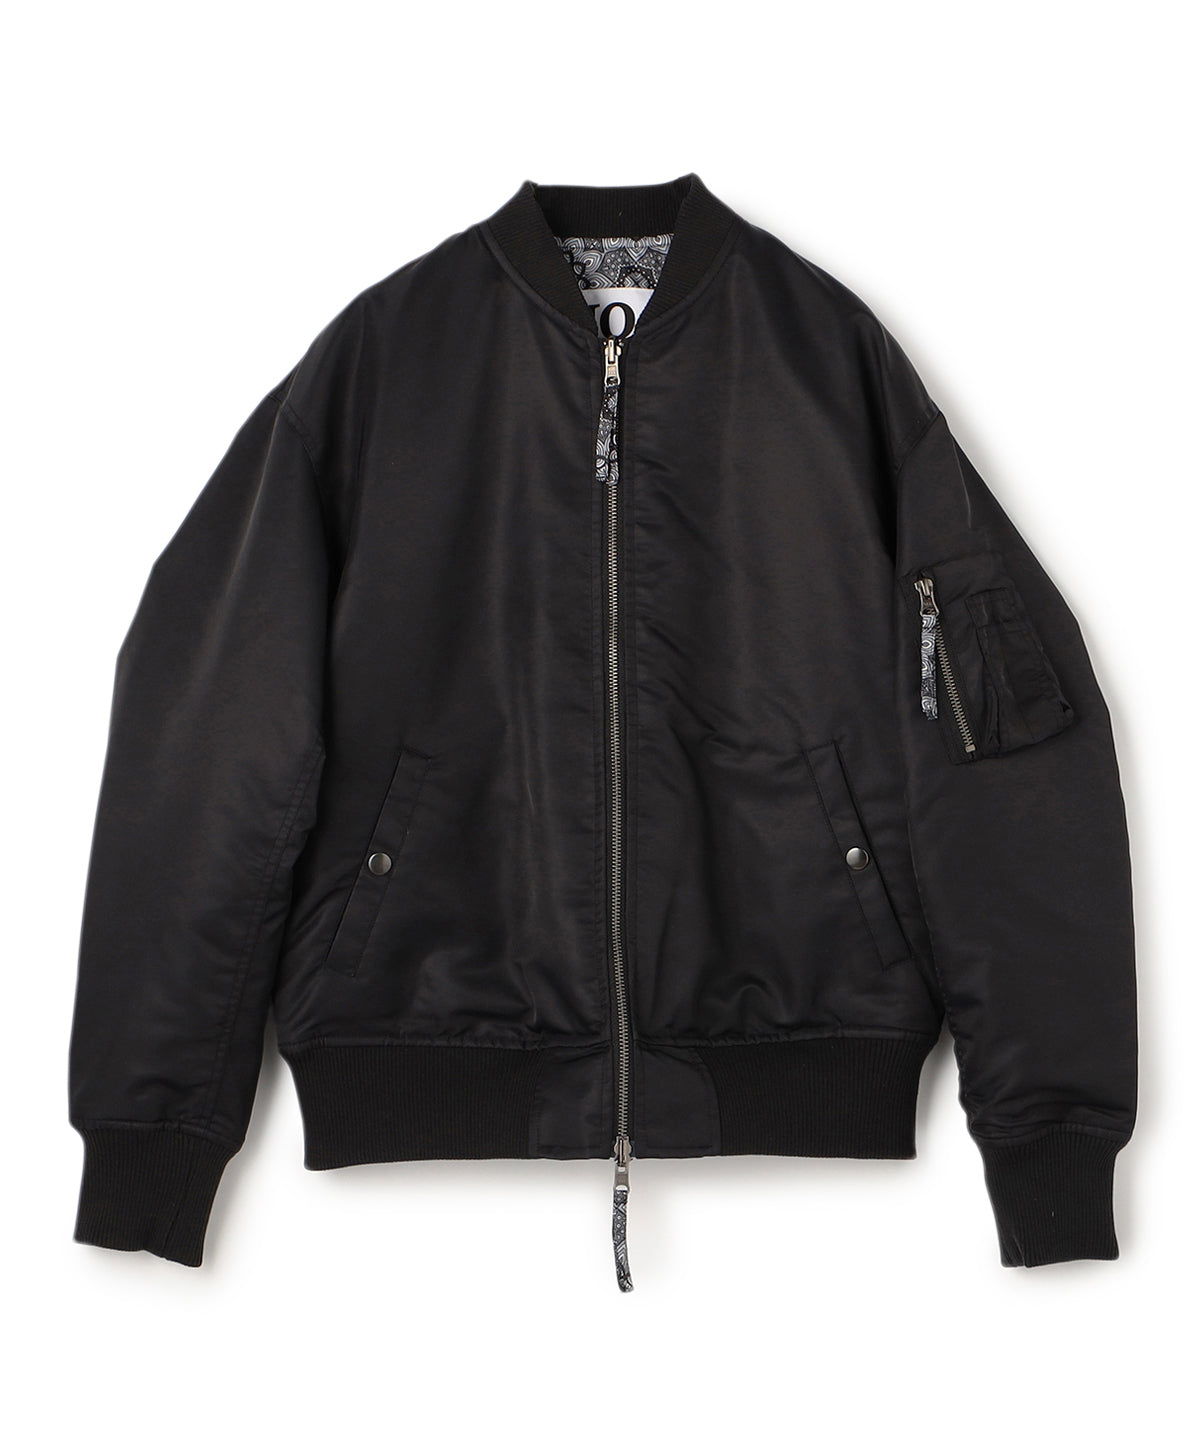 MA-1 BLACK | Outerwear | CLOUDY official mail order site